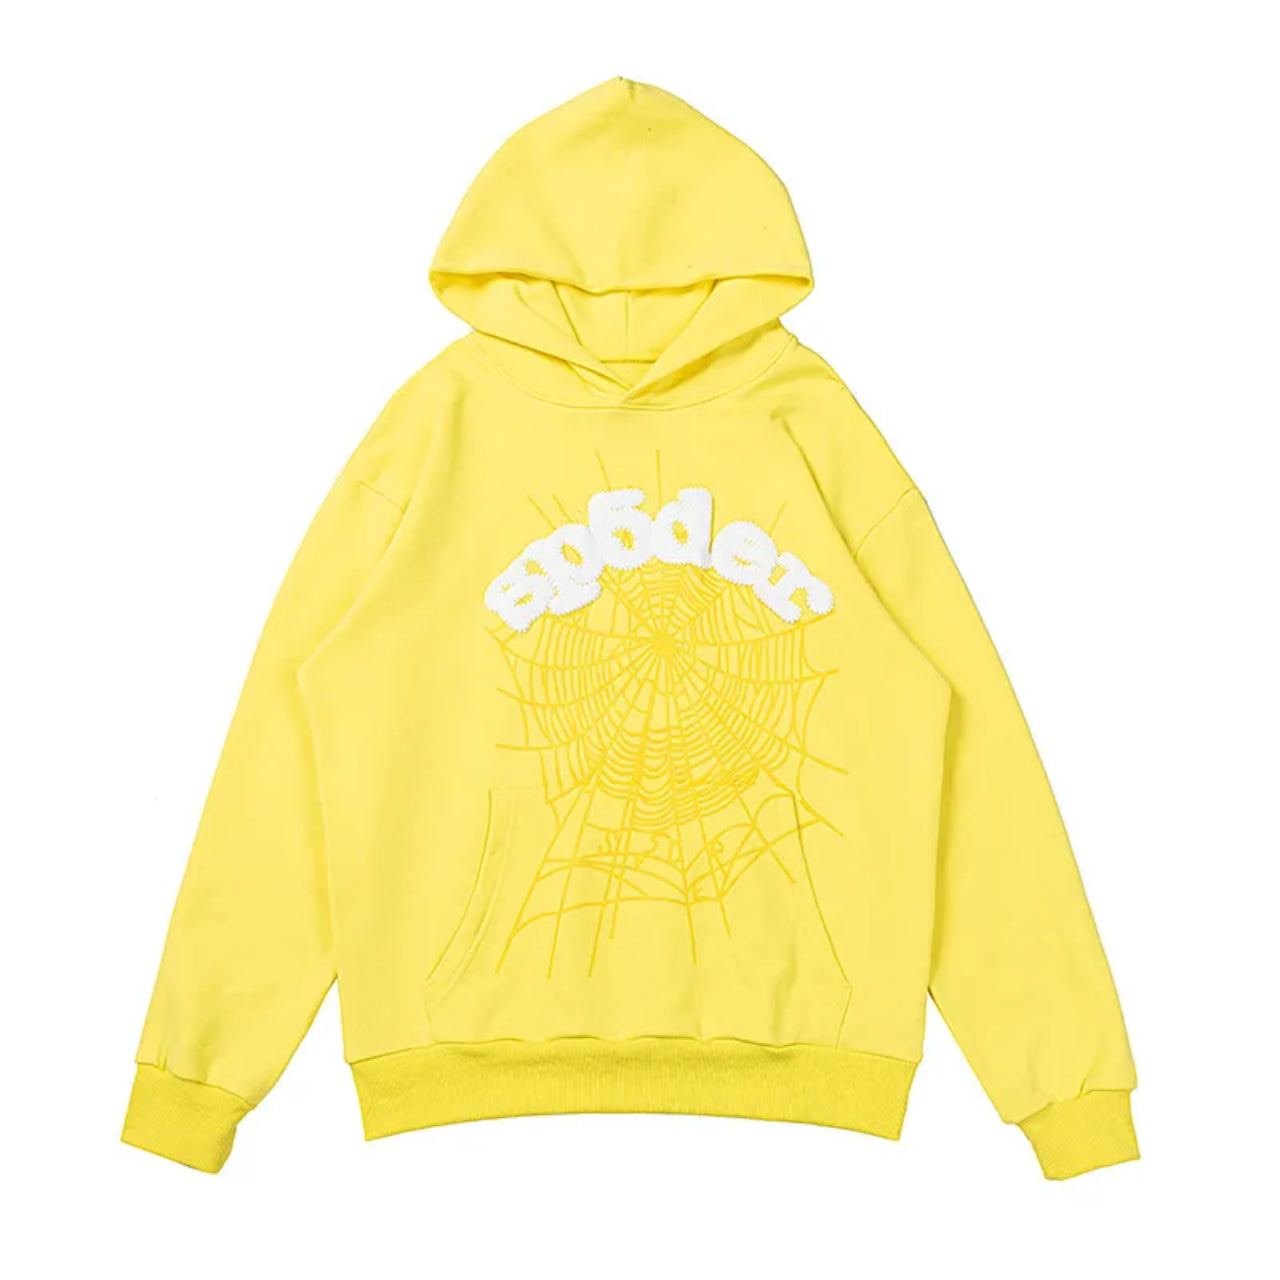 Sp5der Yellow Tracksuit